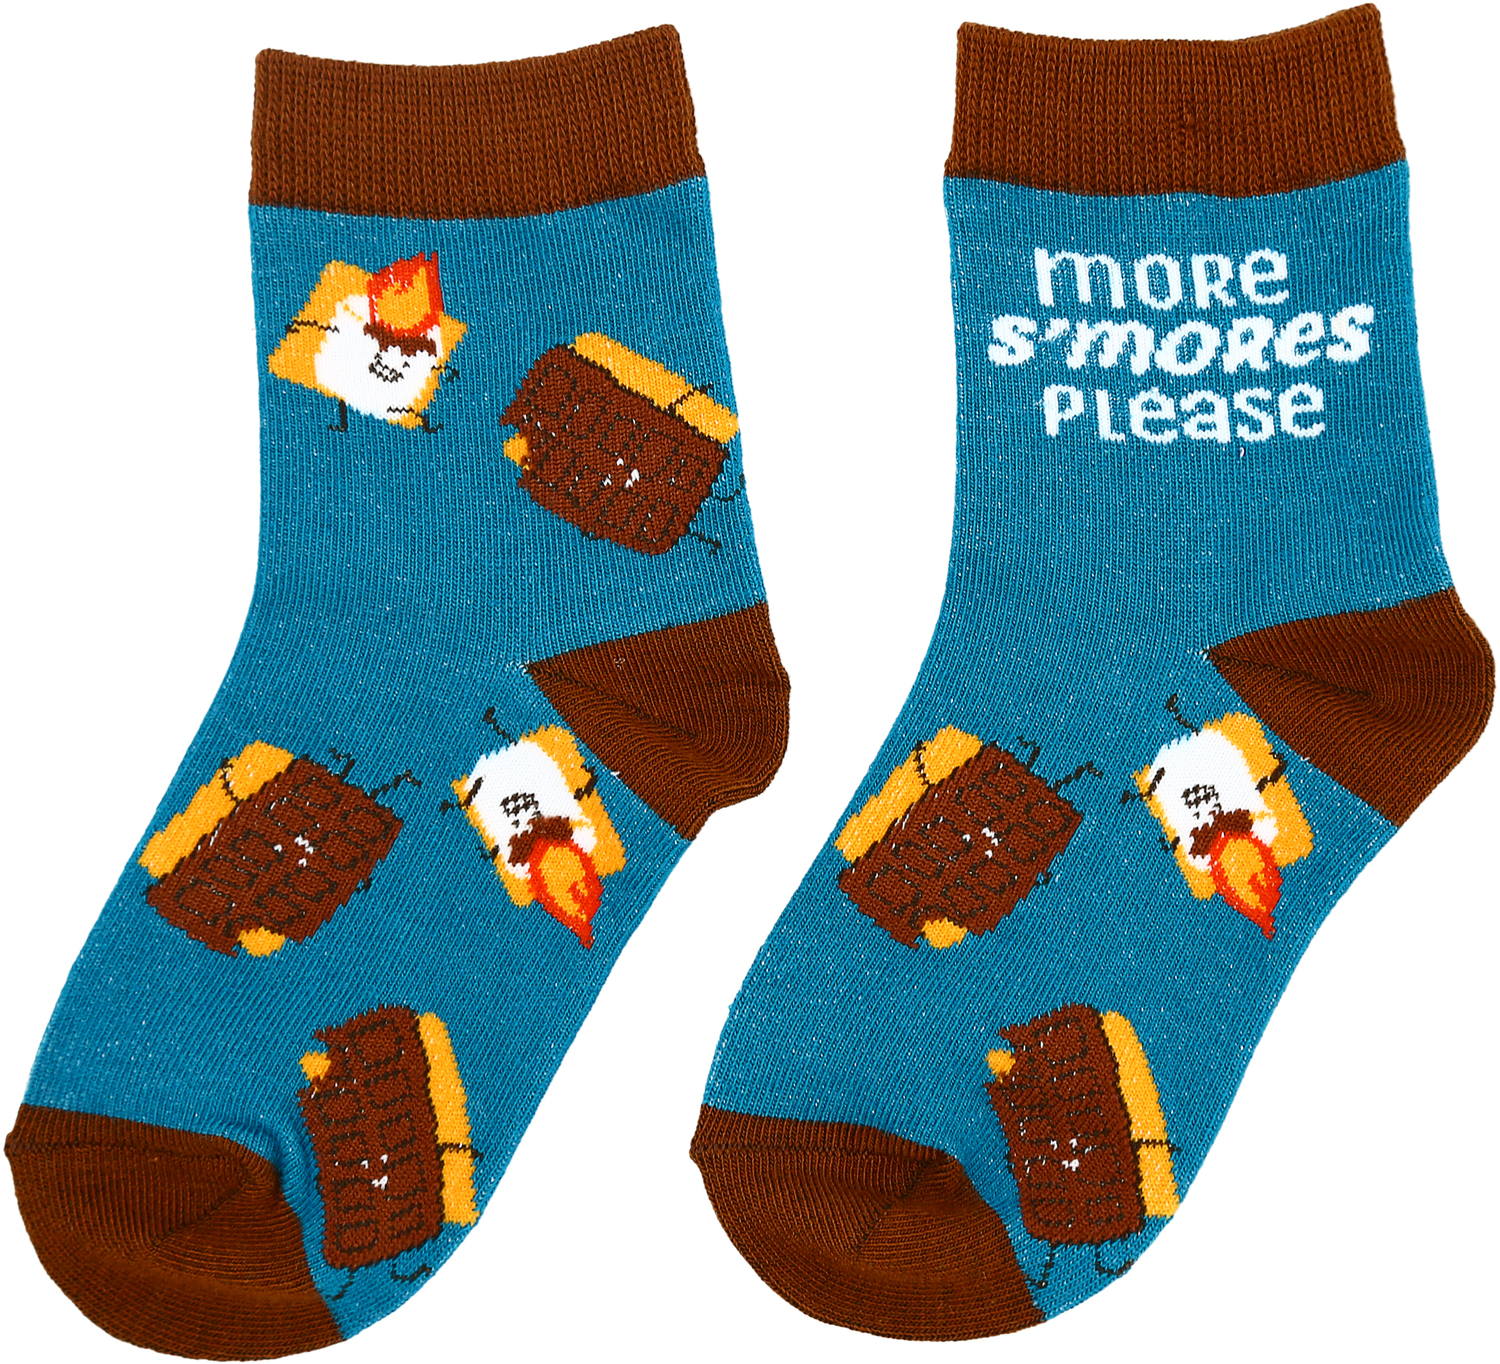 S'mores by Late Night Snacks - S'mores - S/M Youth Cotton Blend Crew Socks